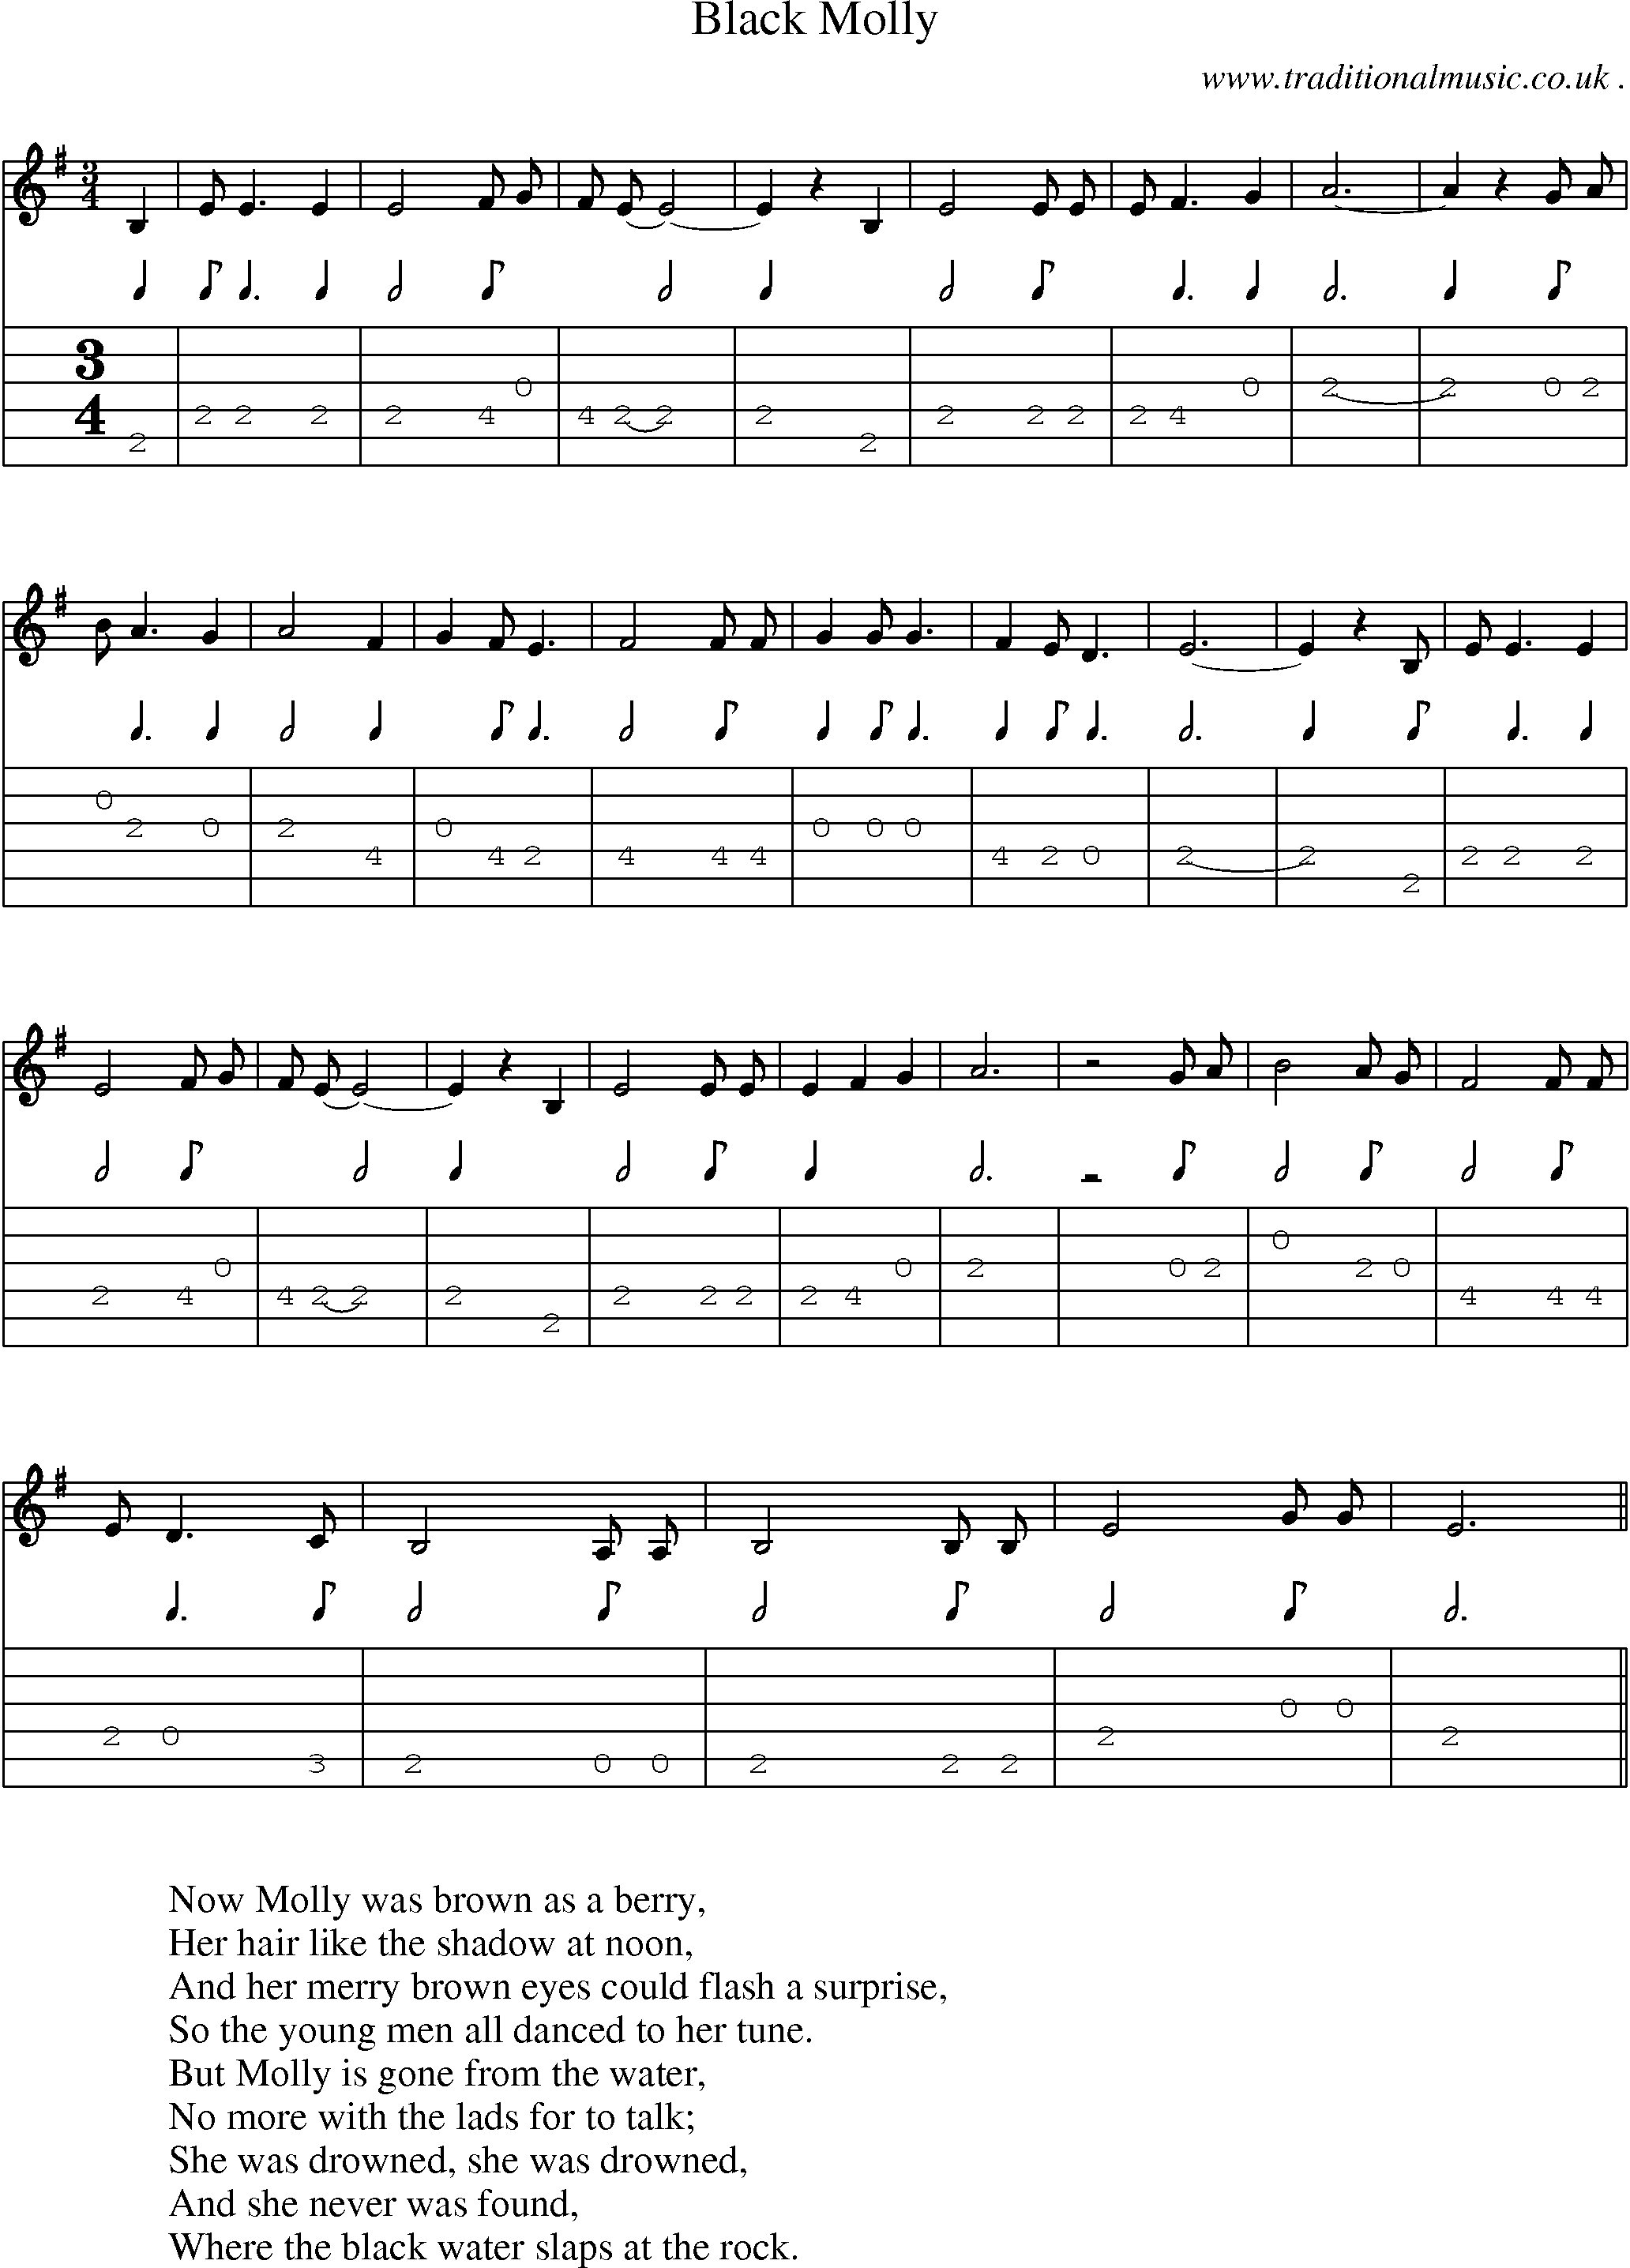 Sheet-Music and Guitar Tabs for Black Molly